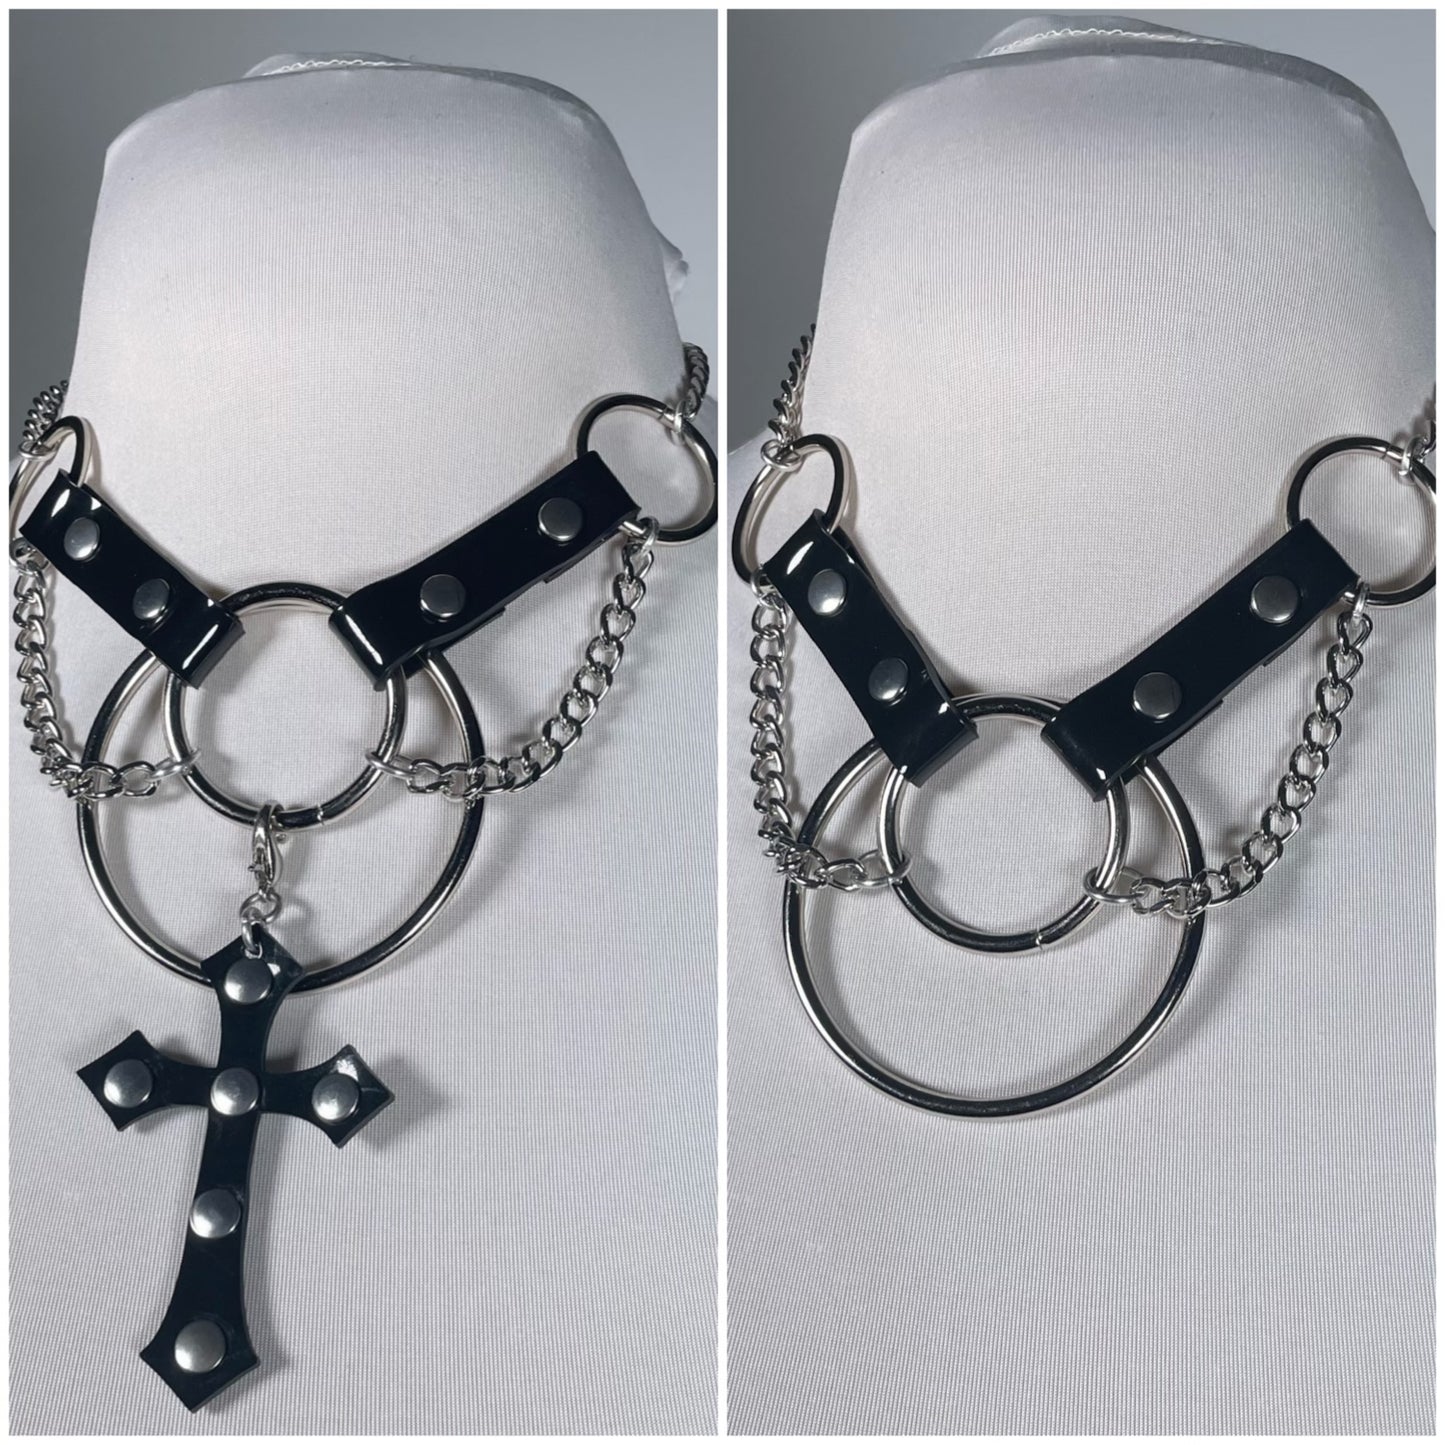 Unholy Passion Necklace